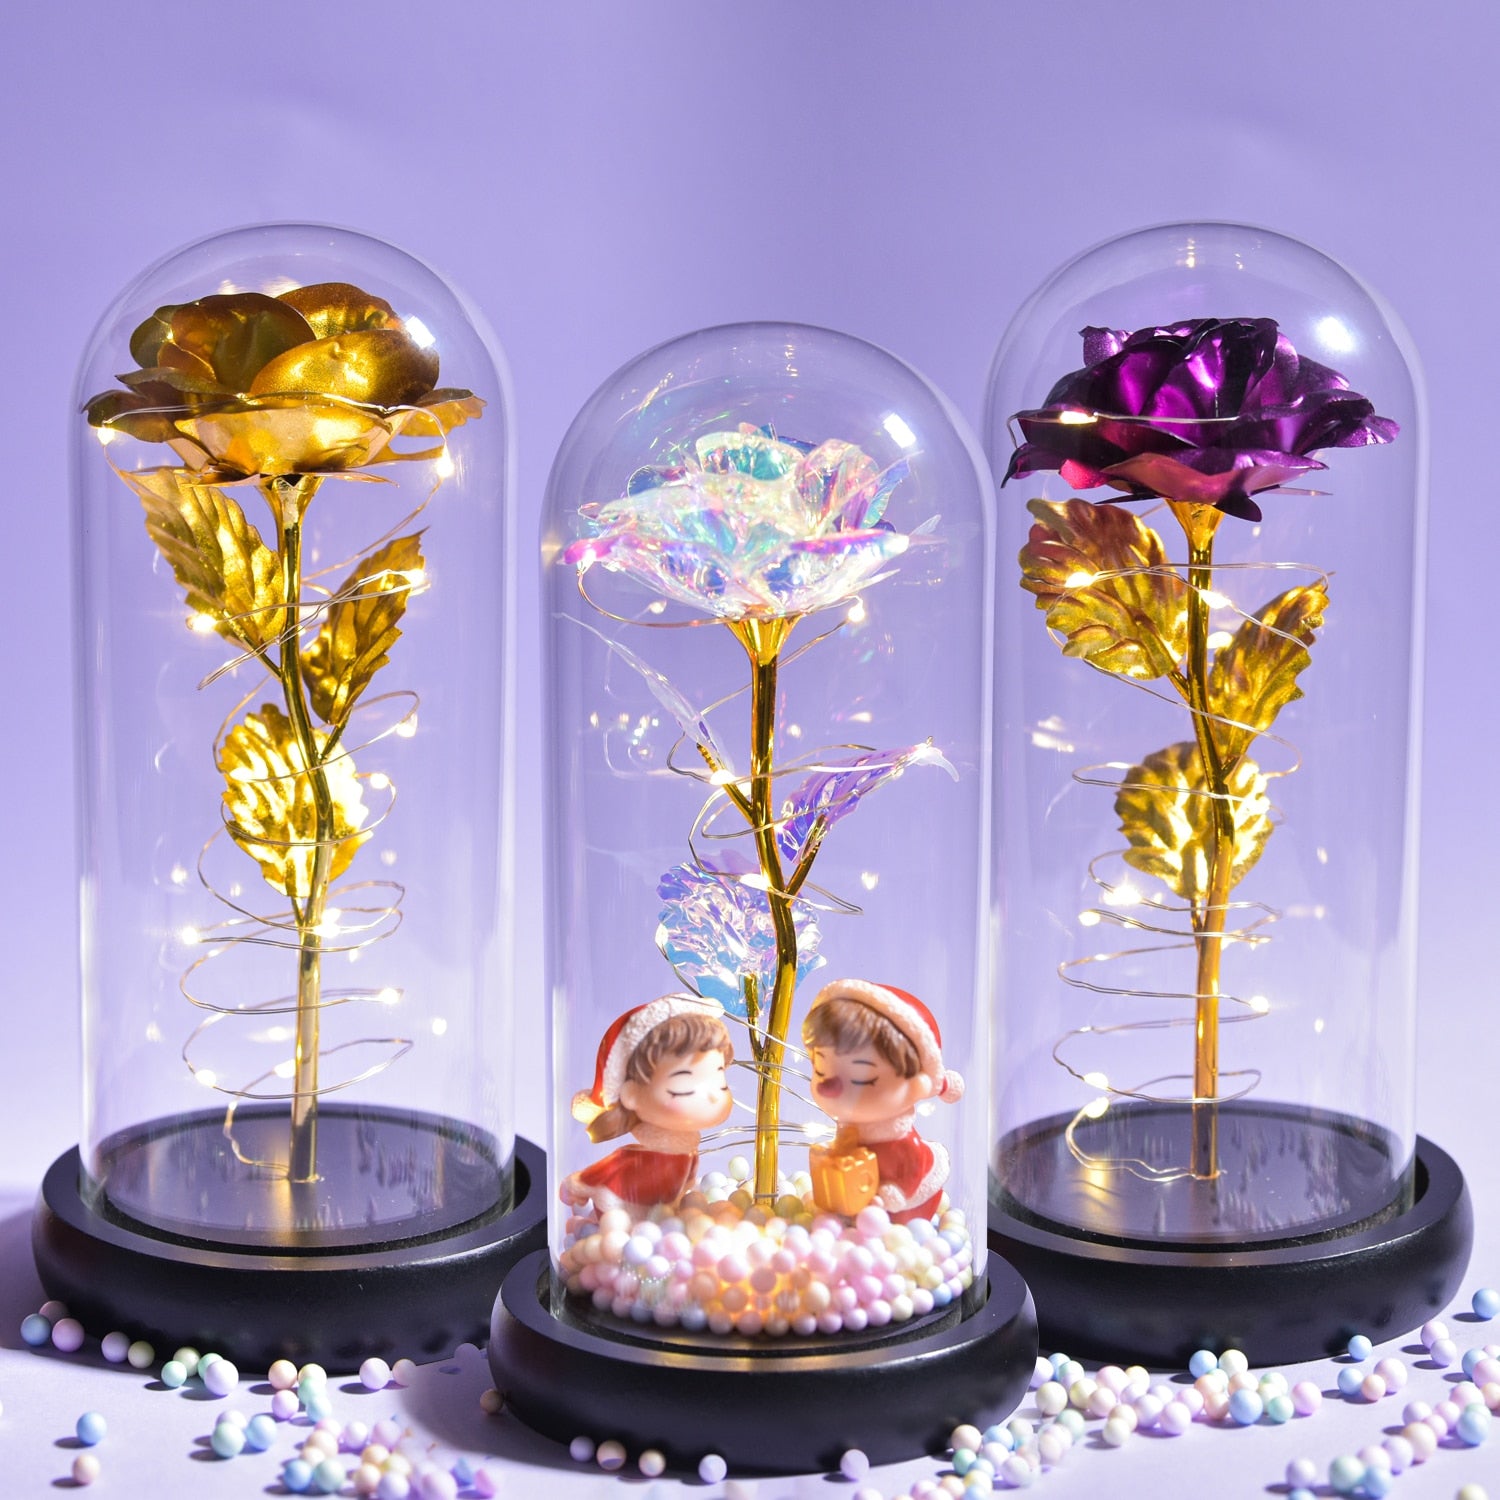 Beauty and the Beast are preserved roses in Galaxy glass